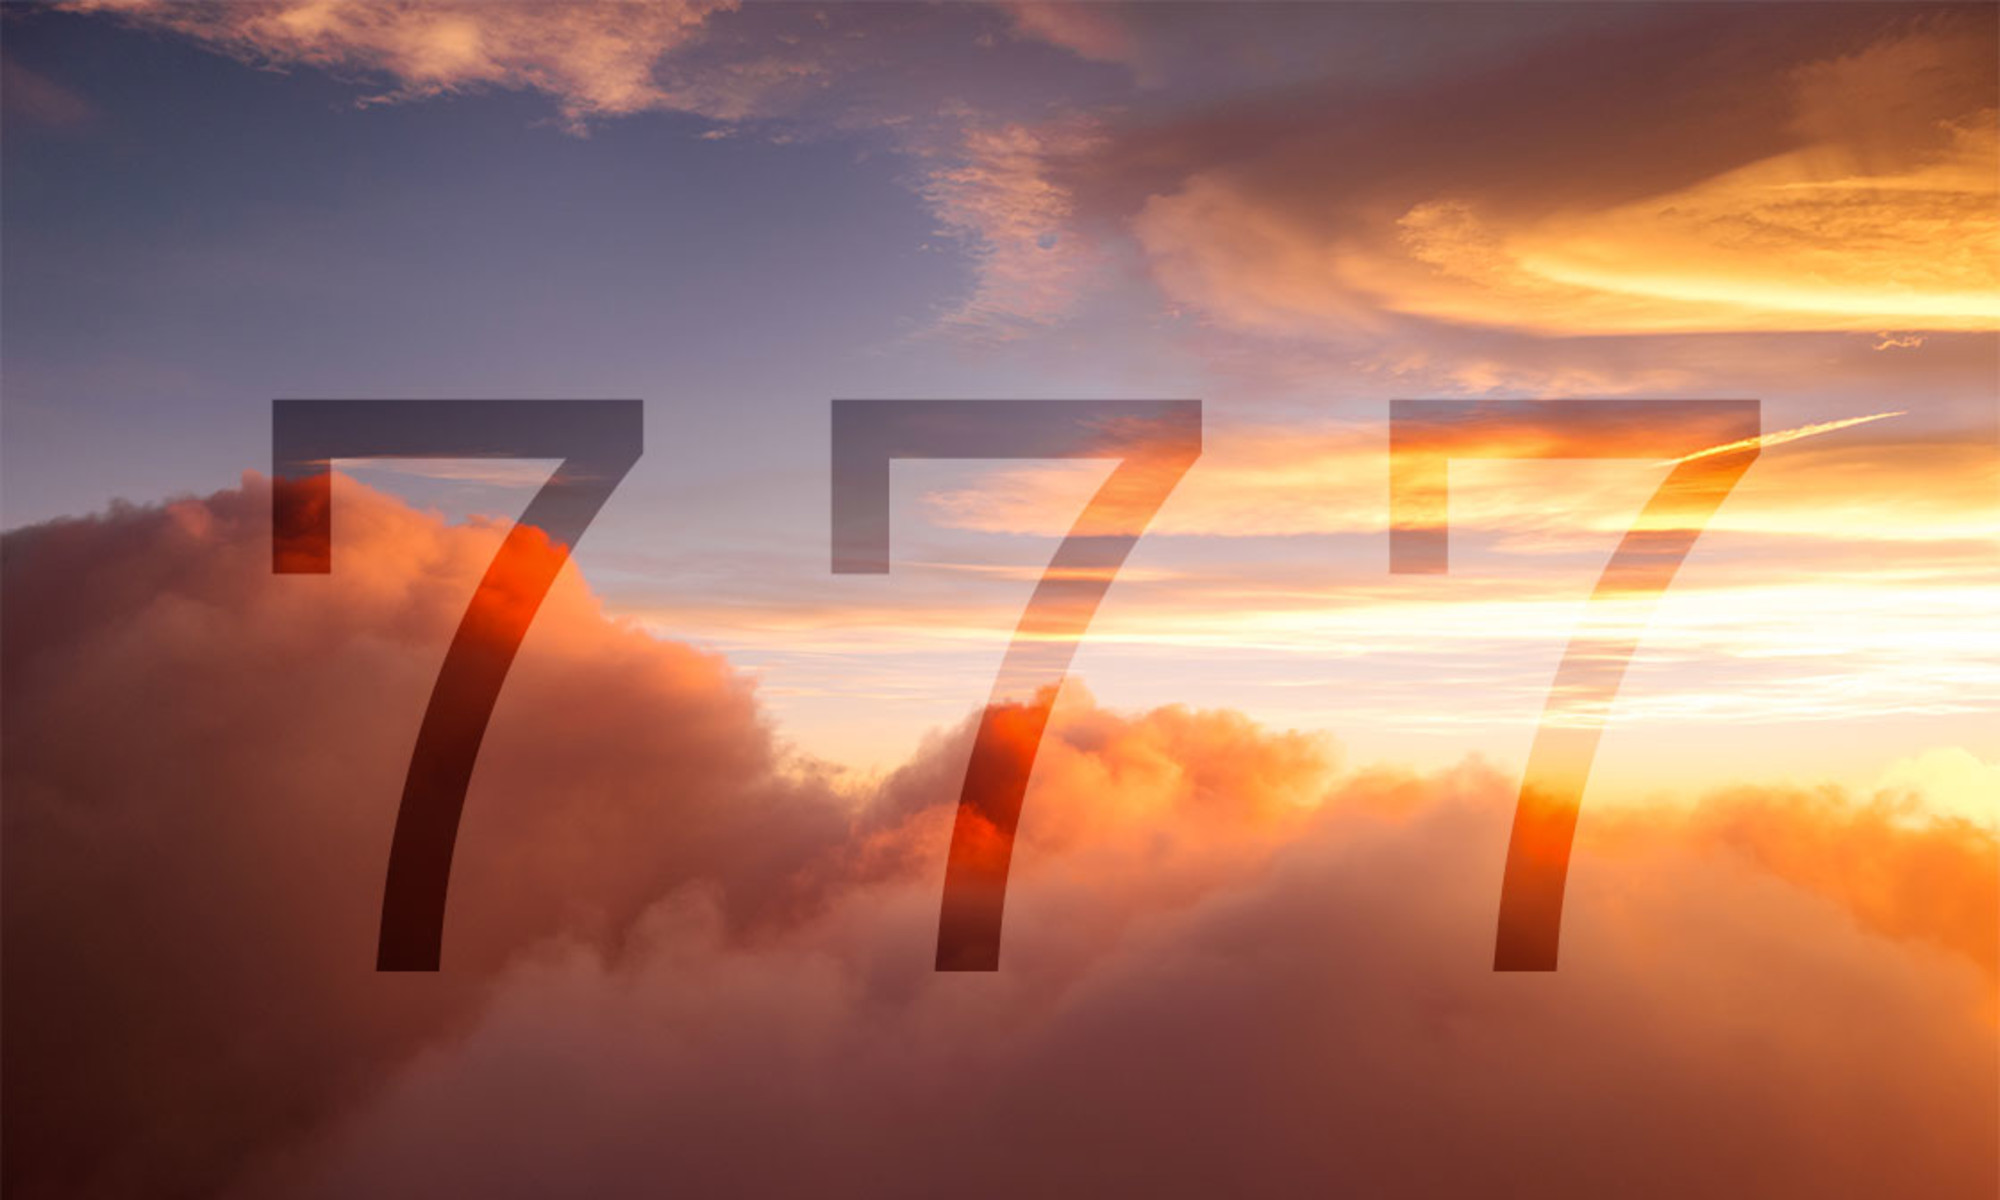 What is the personal meaning behind the angelic number 777?
